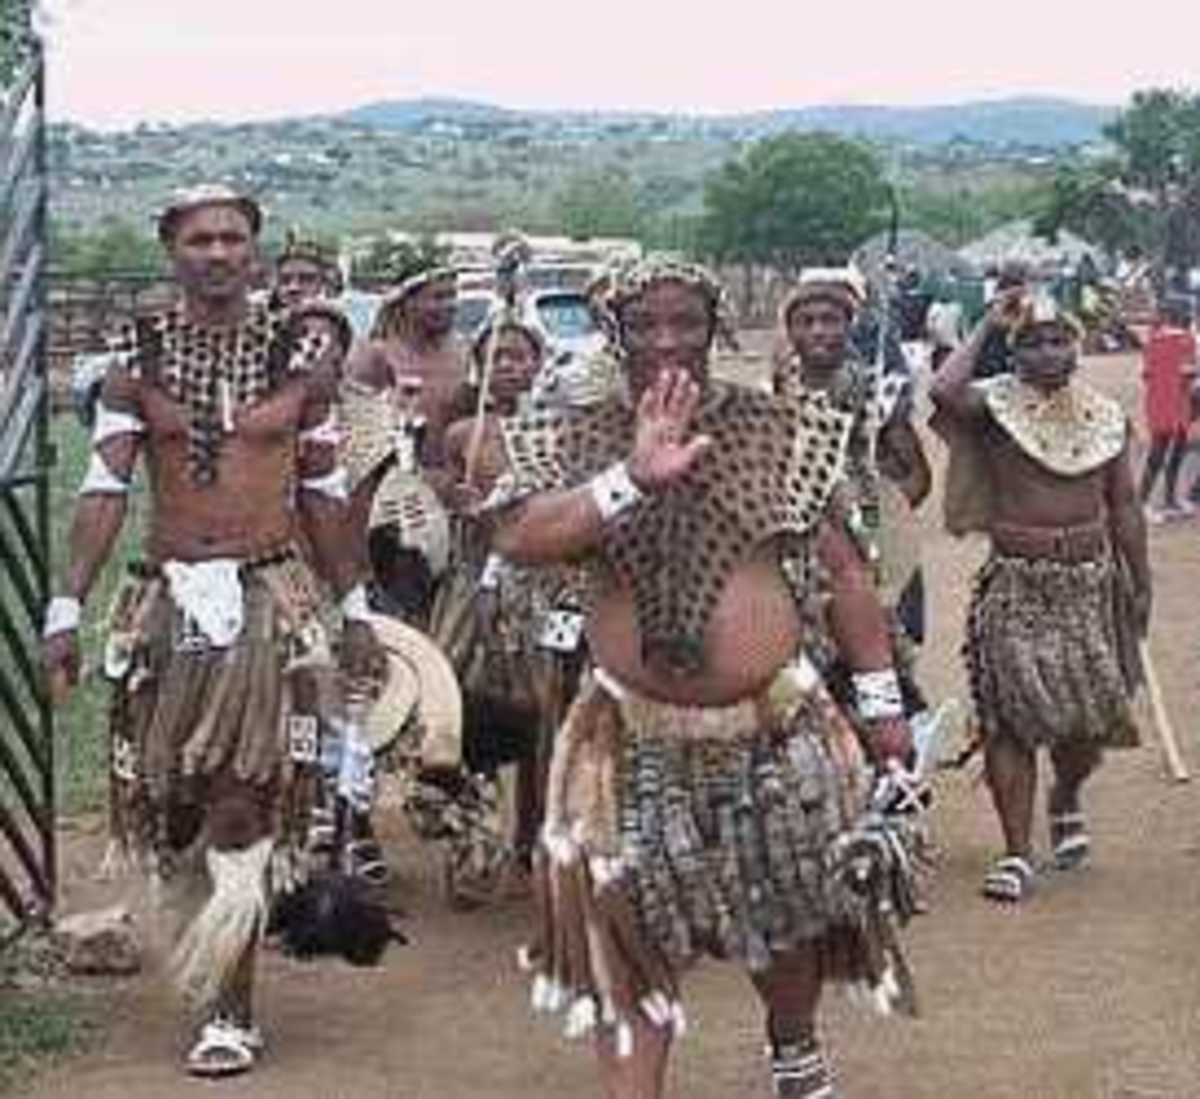 Zulu men dressed in full Zulu traditional regalia, note their shoes,"mbatata" made of car tires